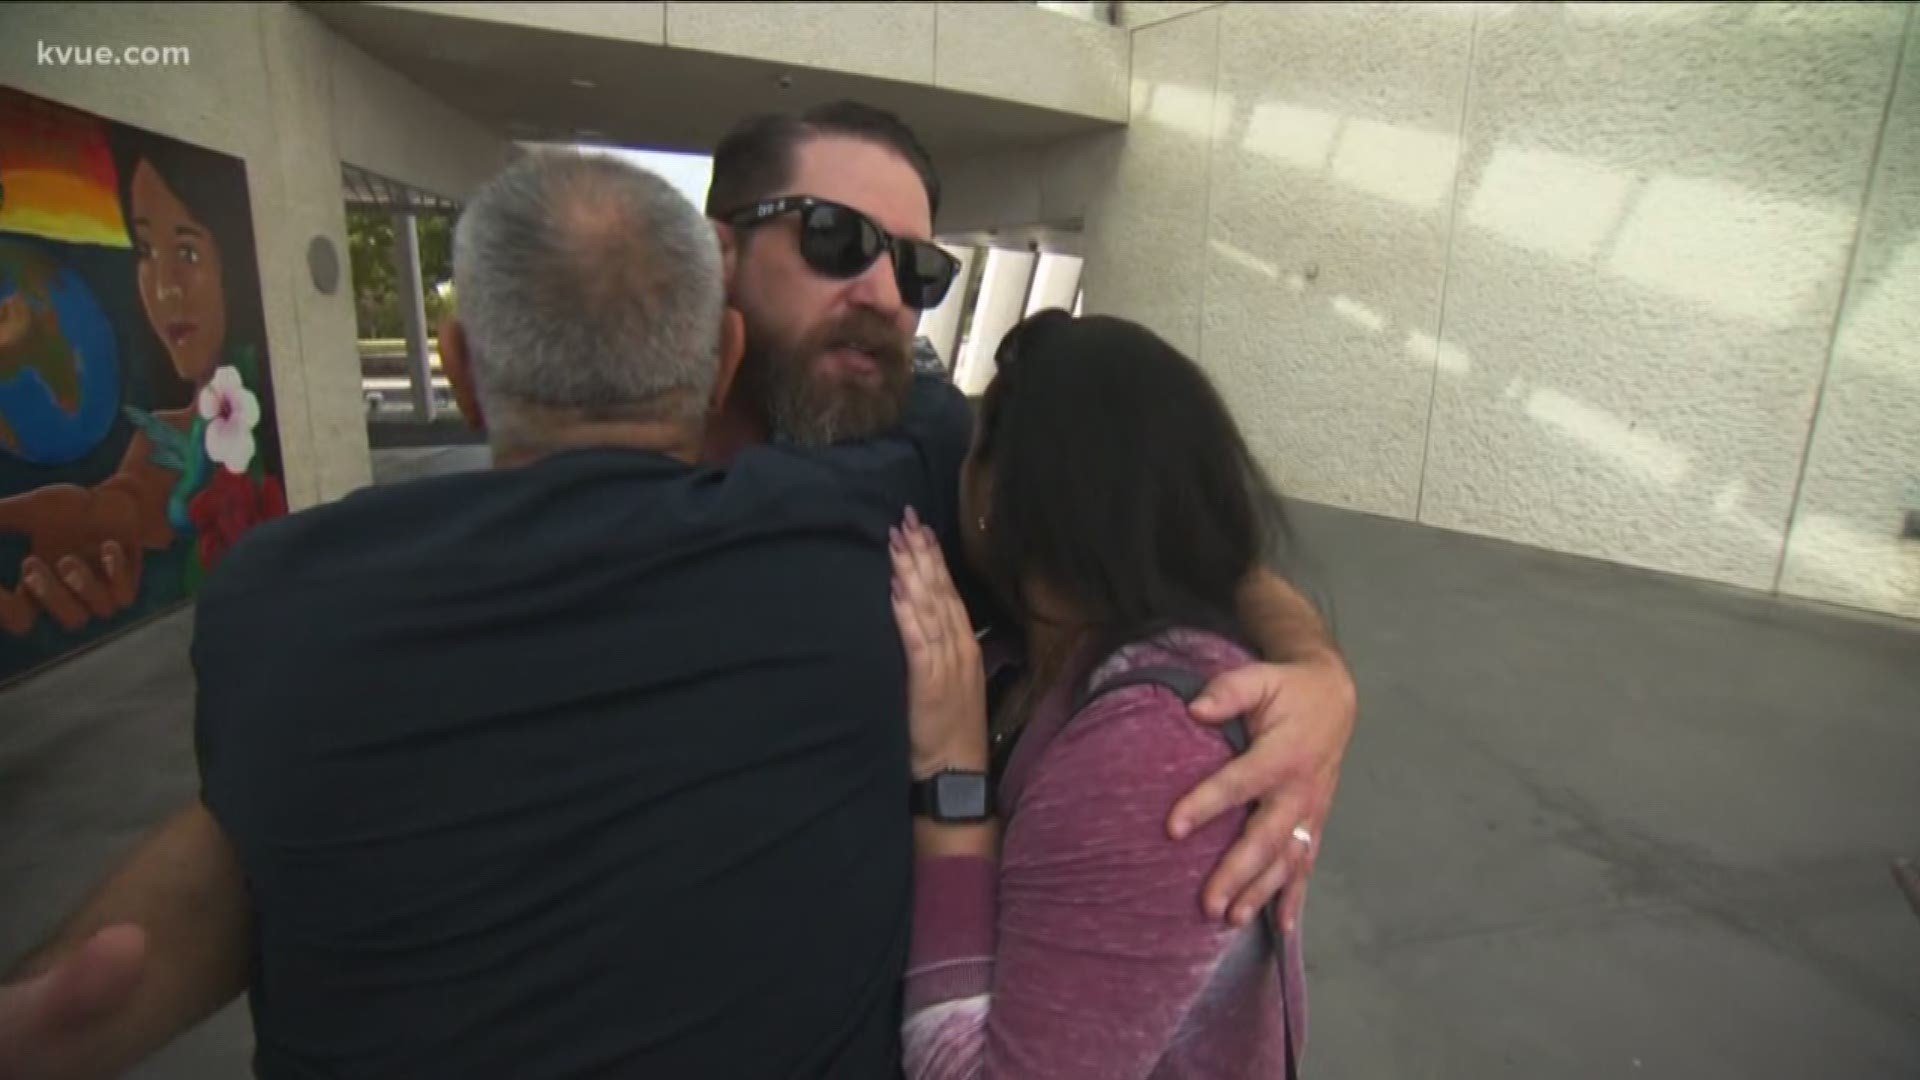 An Austin family feared the worst after they hadn't seen their loved one in two days. But on Tuesday morning, they got good news.